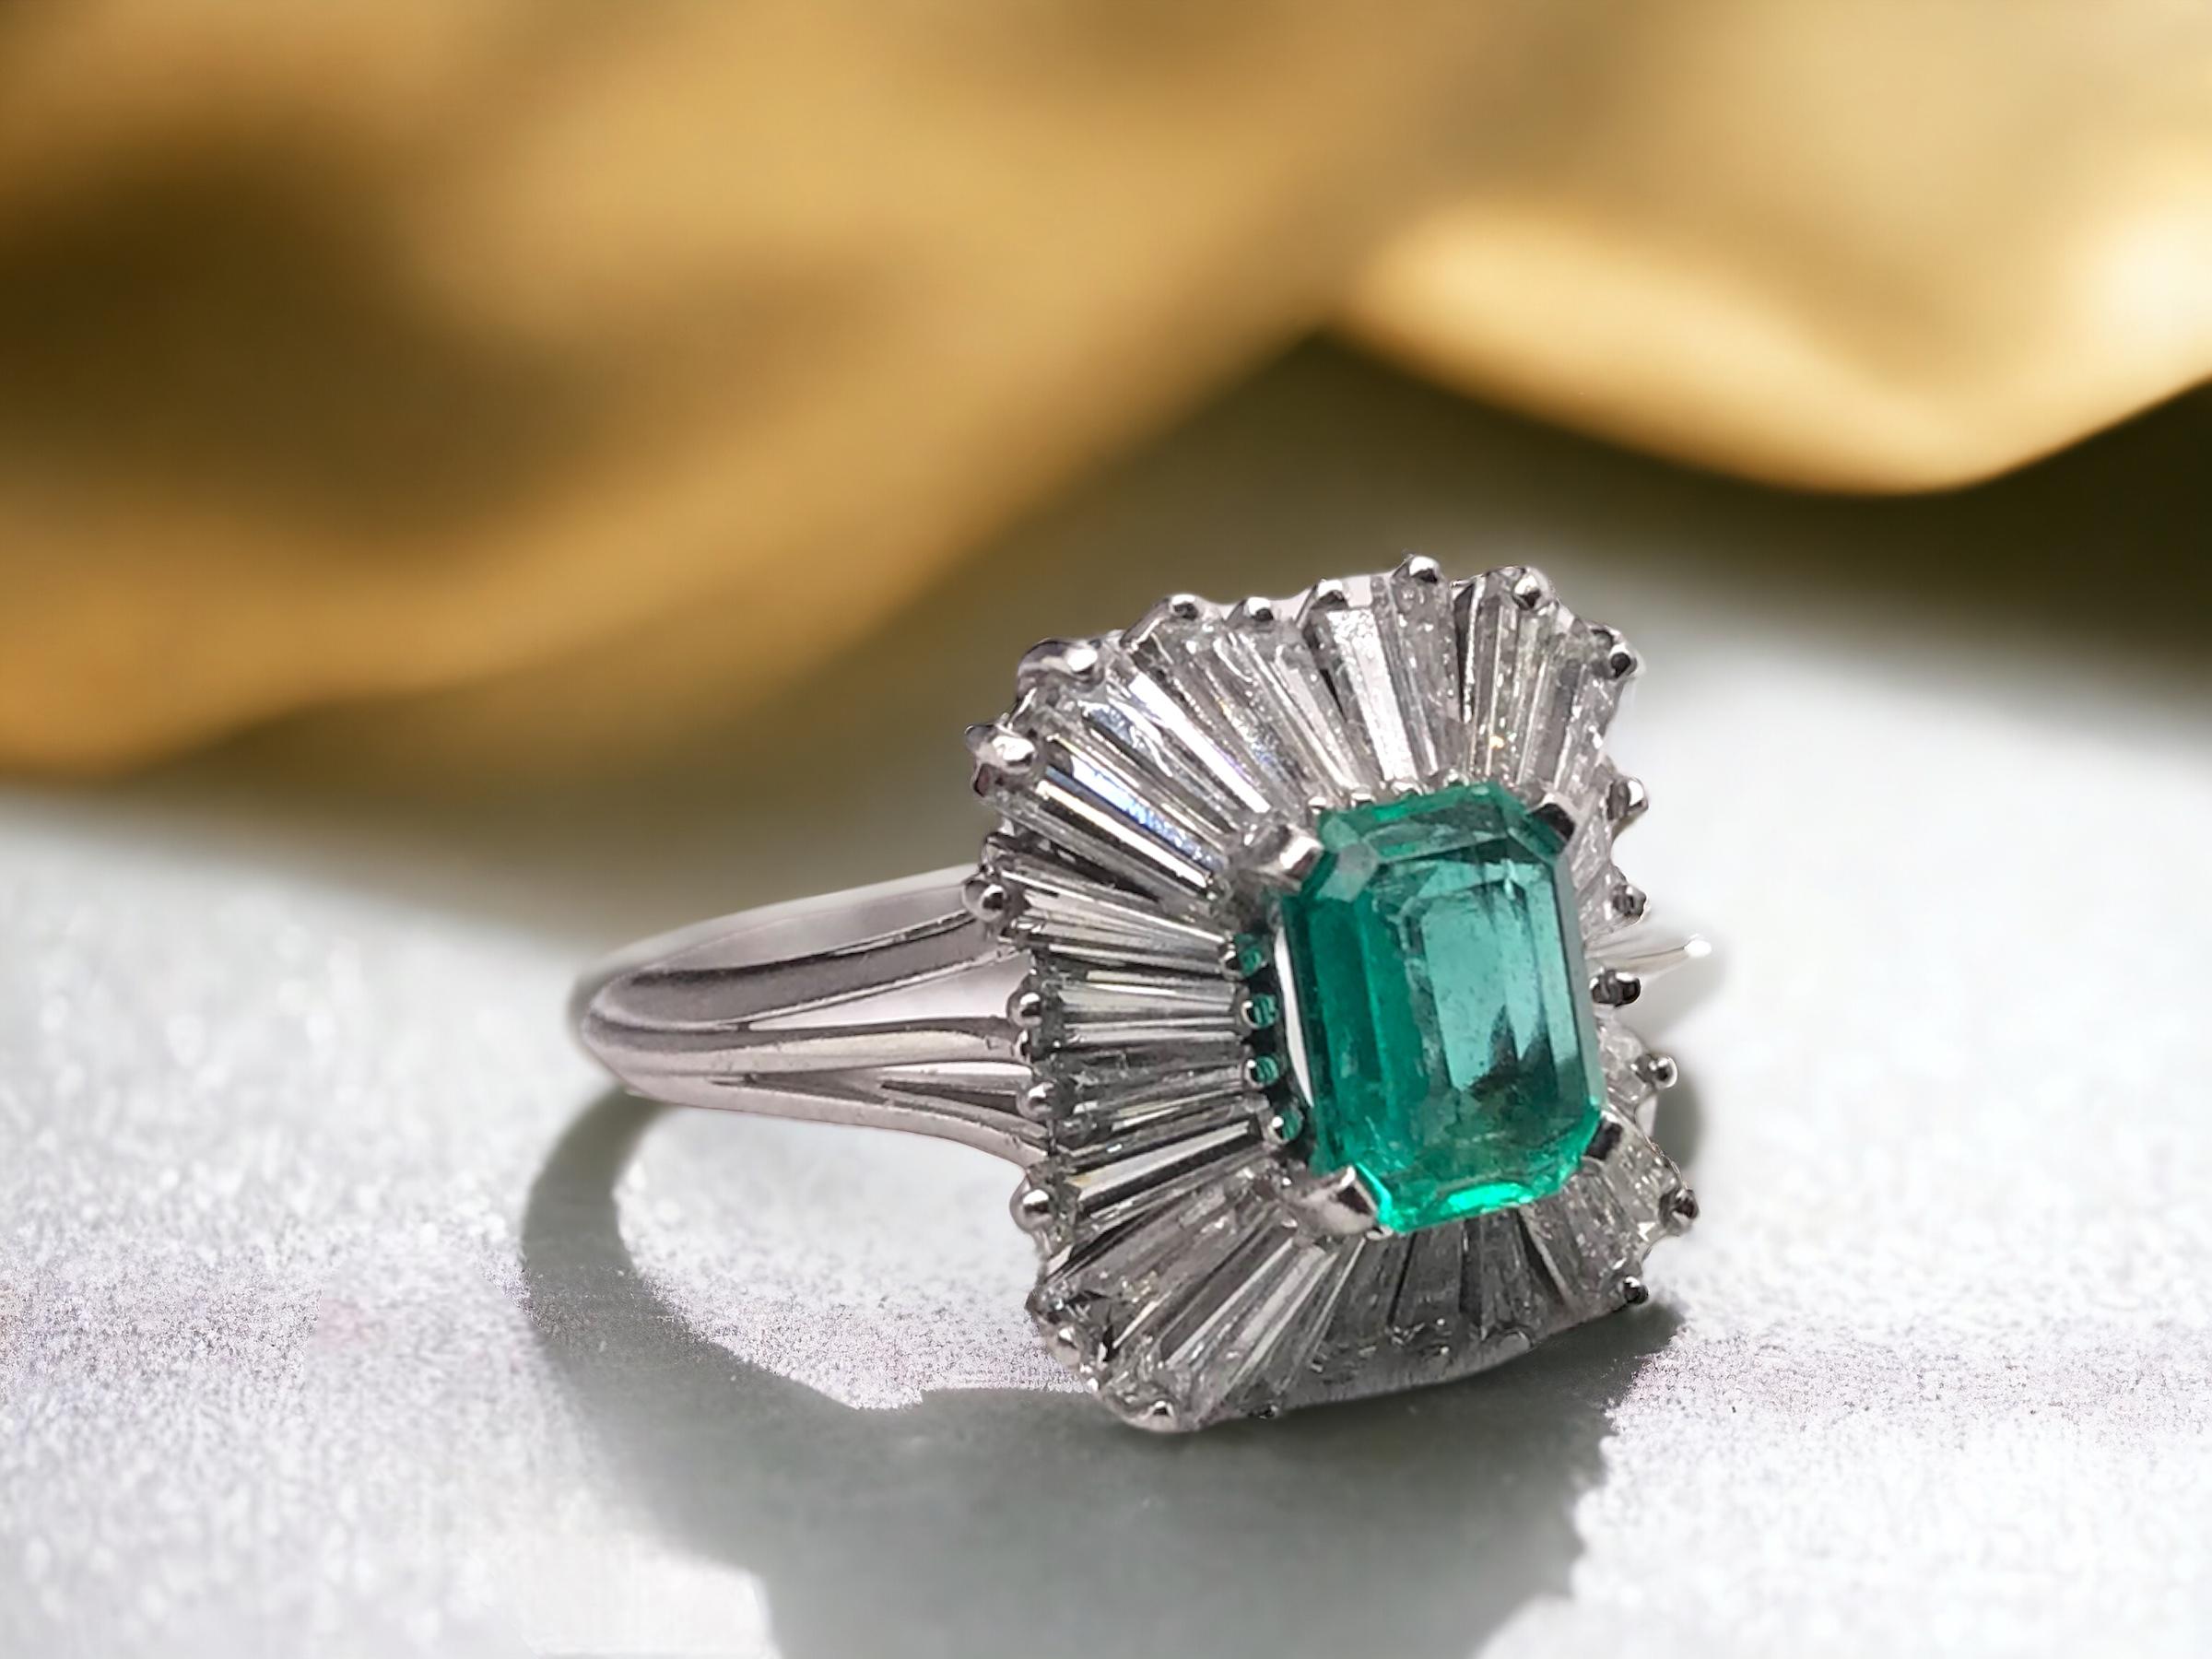 This beauty is exactly everything we love about Retro pieces!
An Erray of super long perfect baguettes combined with magnificent color.

Ring Details
Material: Platinum
Era: Retro 1940 - 1980
Head Measurements: 16.1mm Length X 14.9mm Width X 10.4mm